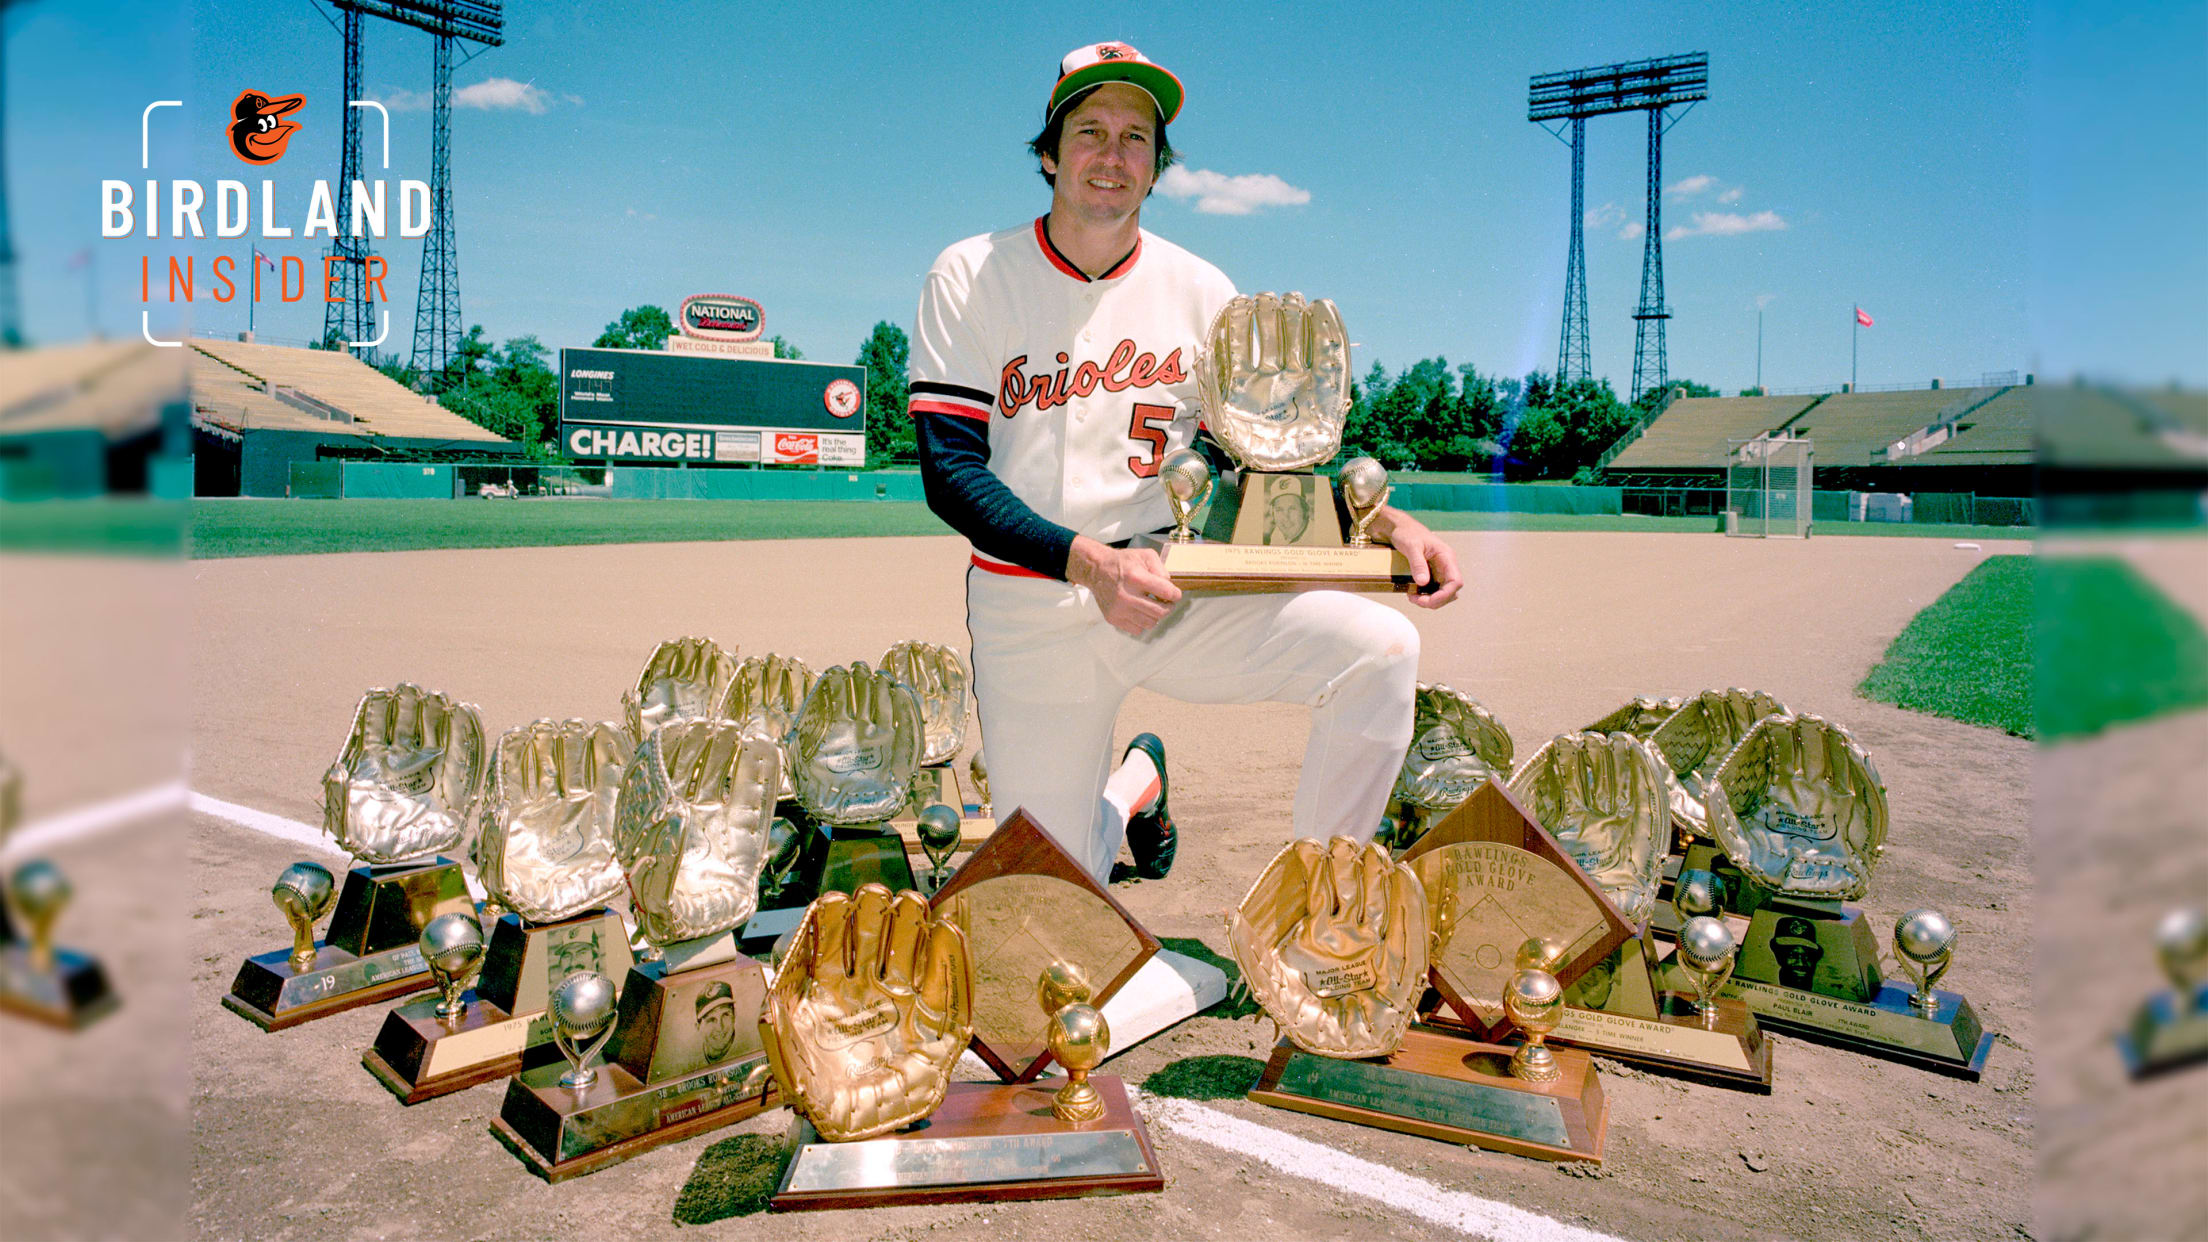 Becoming Mr. Hoover: Brooks Robinson 1970 World Series